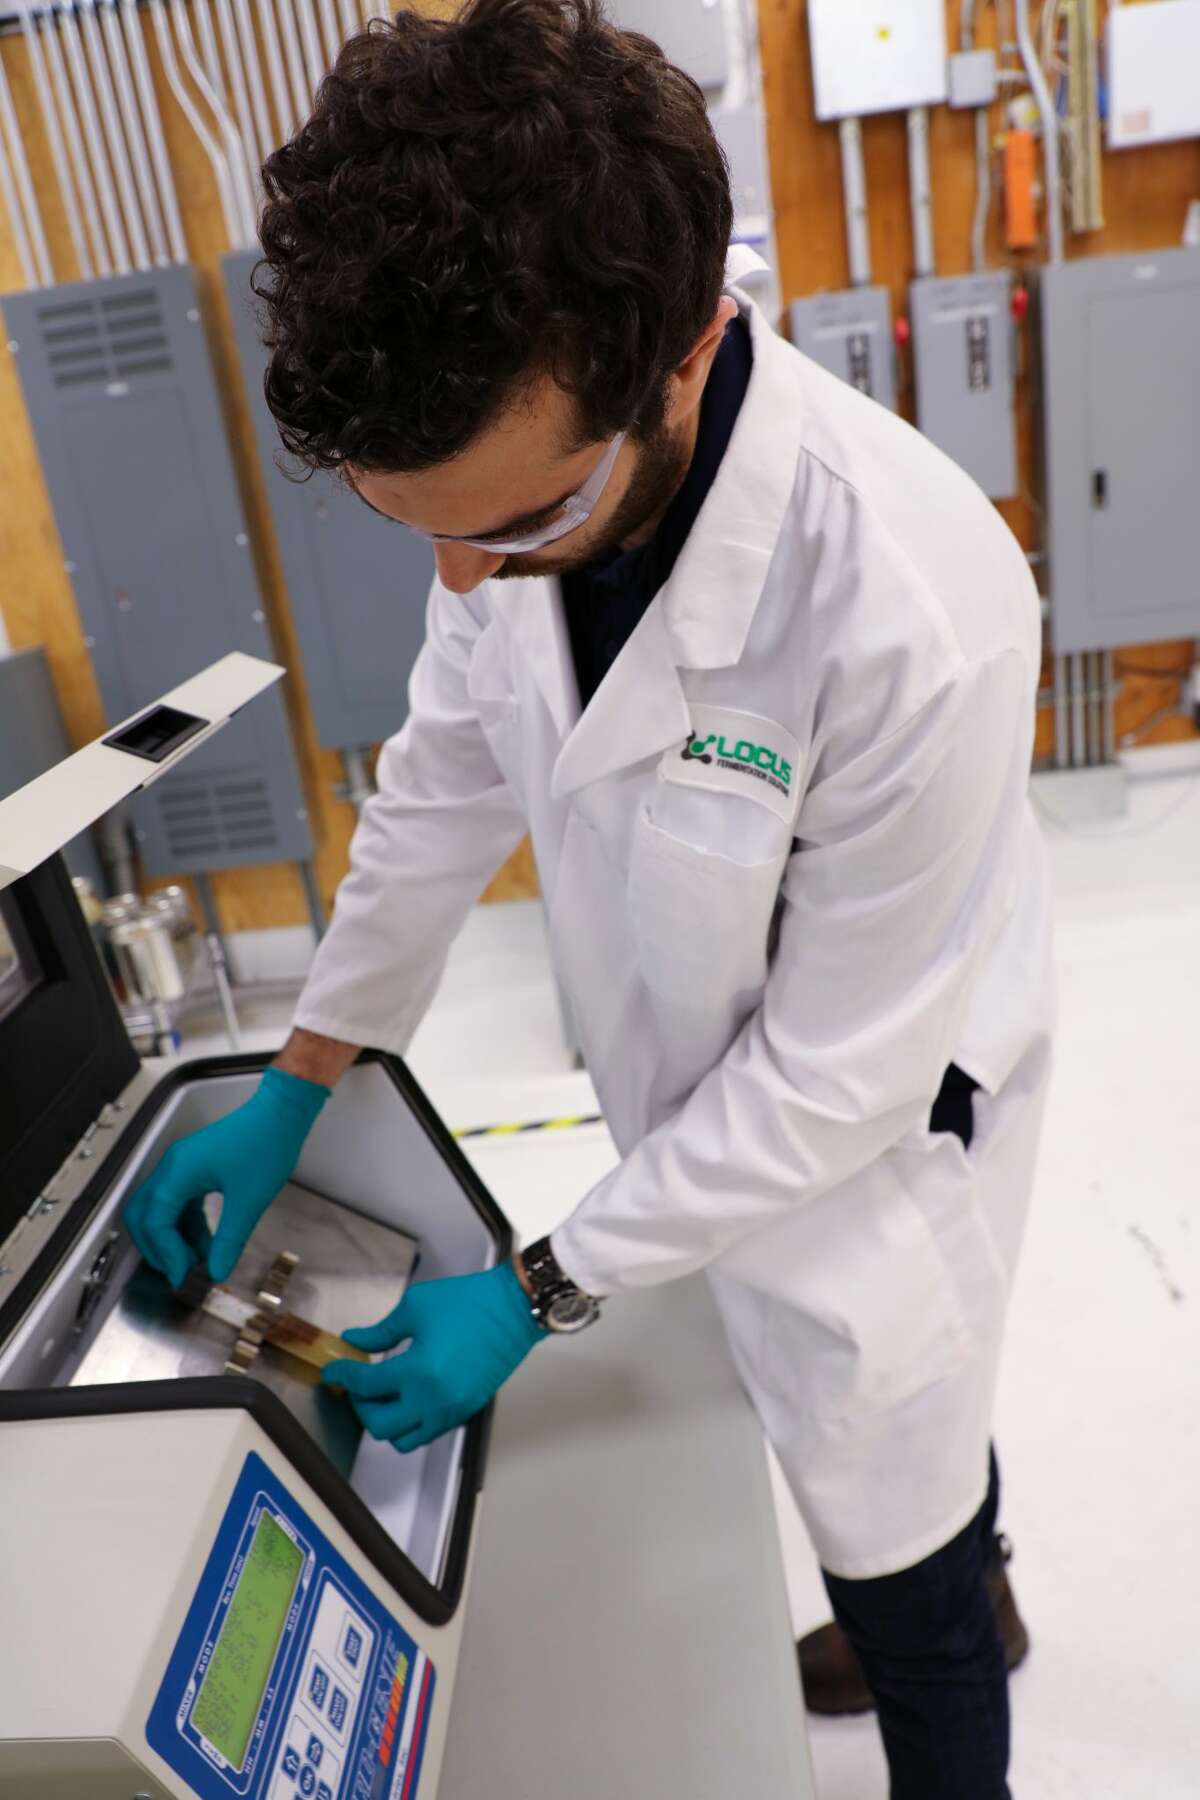 Locus Bio-Energy, which provides nontoxic, environmentally friendly biosurfactants to treat paraffin buildup, will expand its Midland facility to twice its current size, just months after opening an innovation center in The Woodlands.